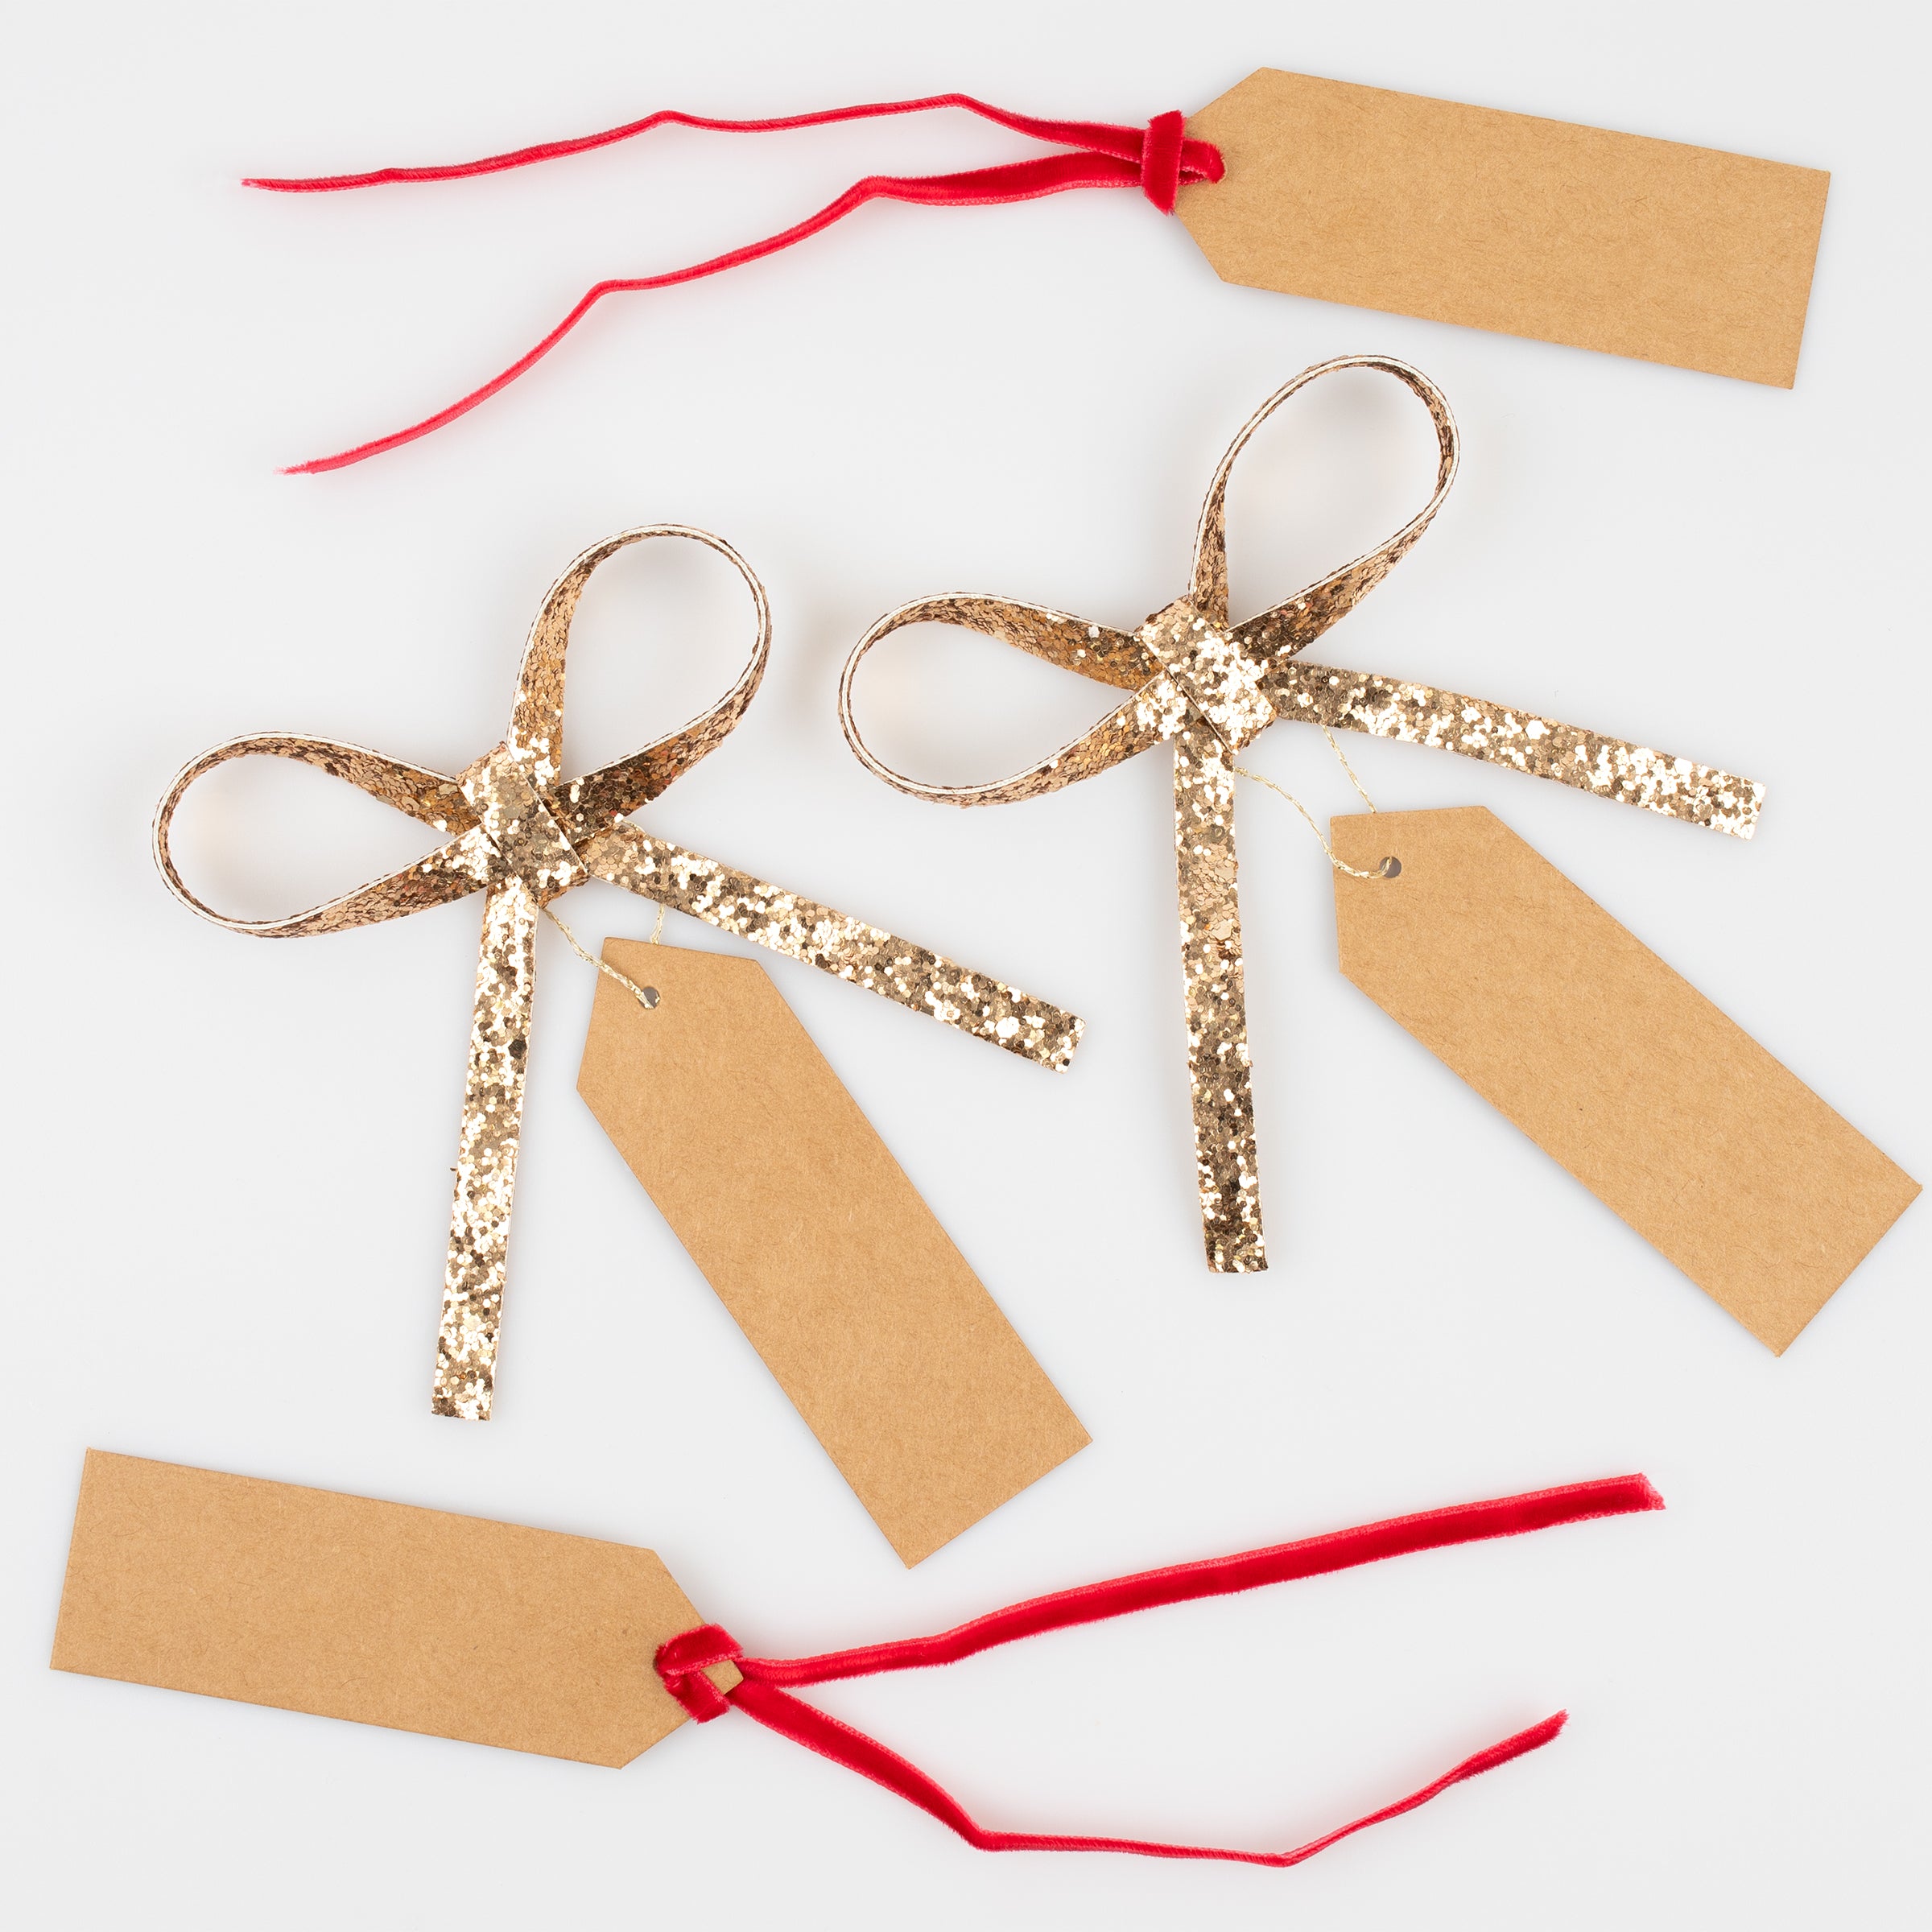 If you're looking for Christmas gift wrapping ideas you'll love our elegant gold bows.